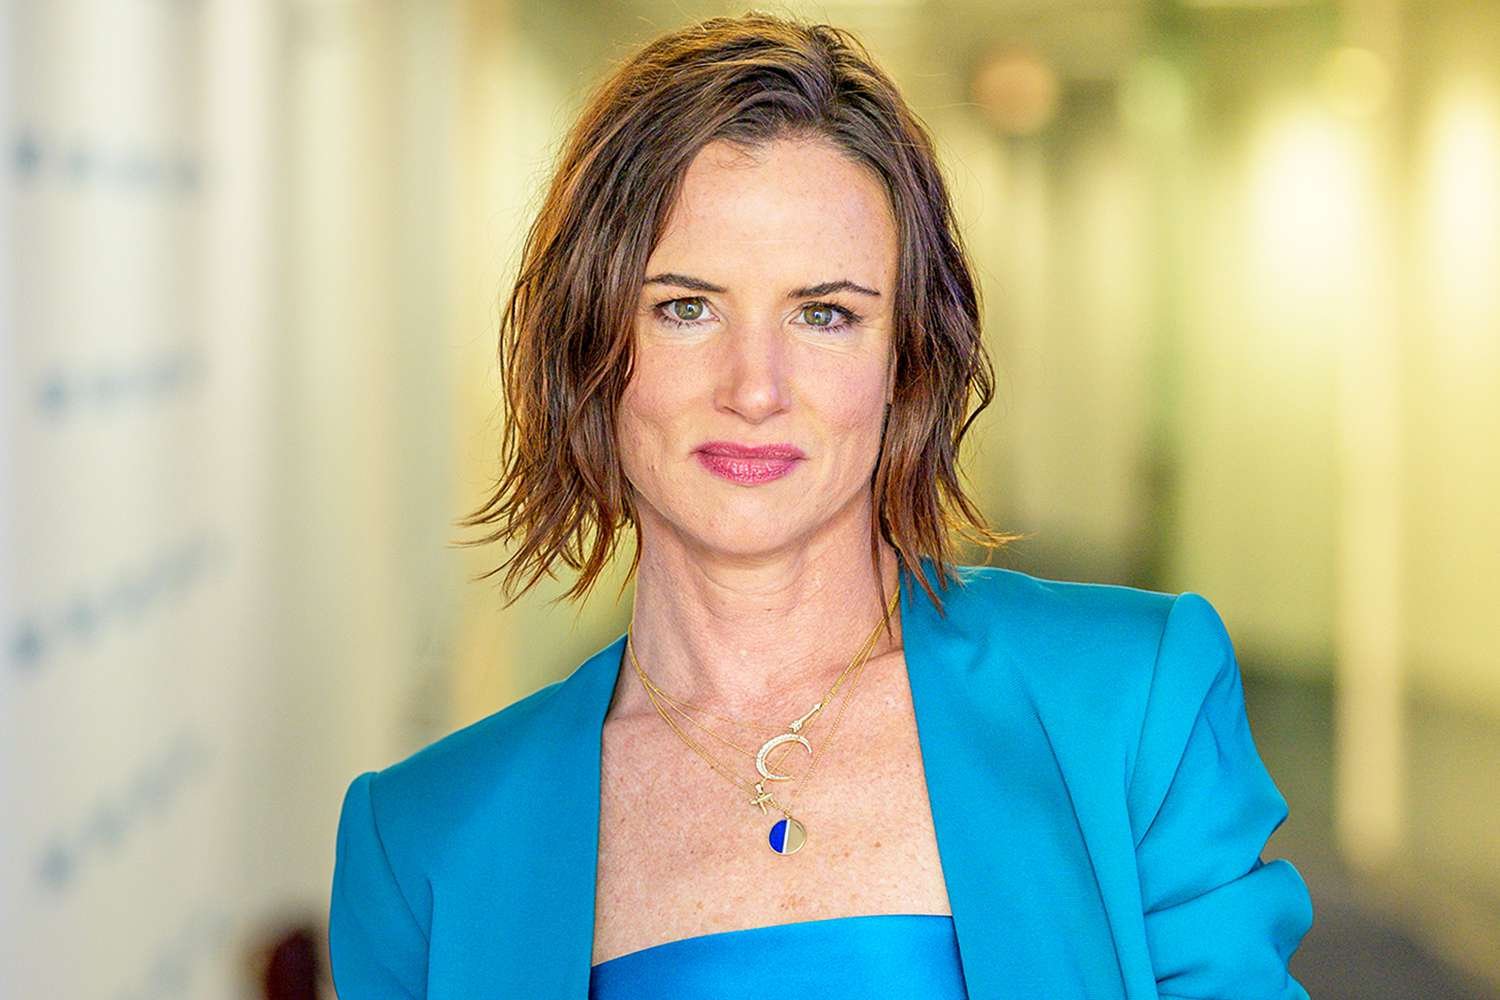 Welcome to Chippendales Cast - Juliette Lewis as Denise